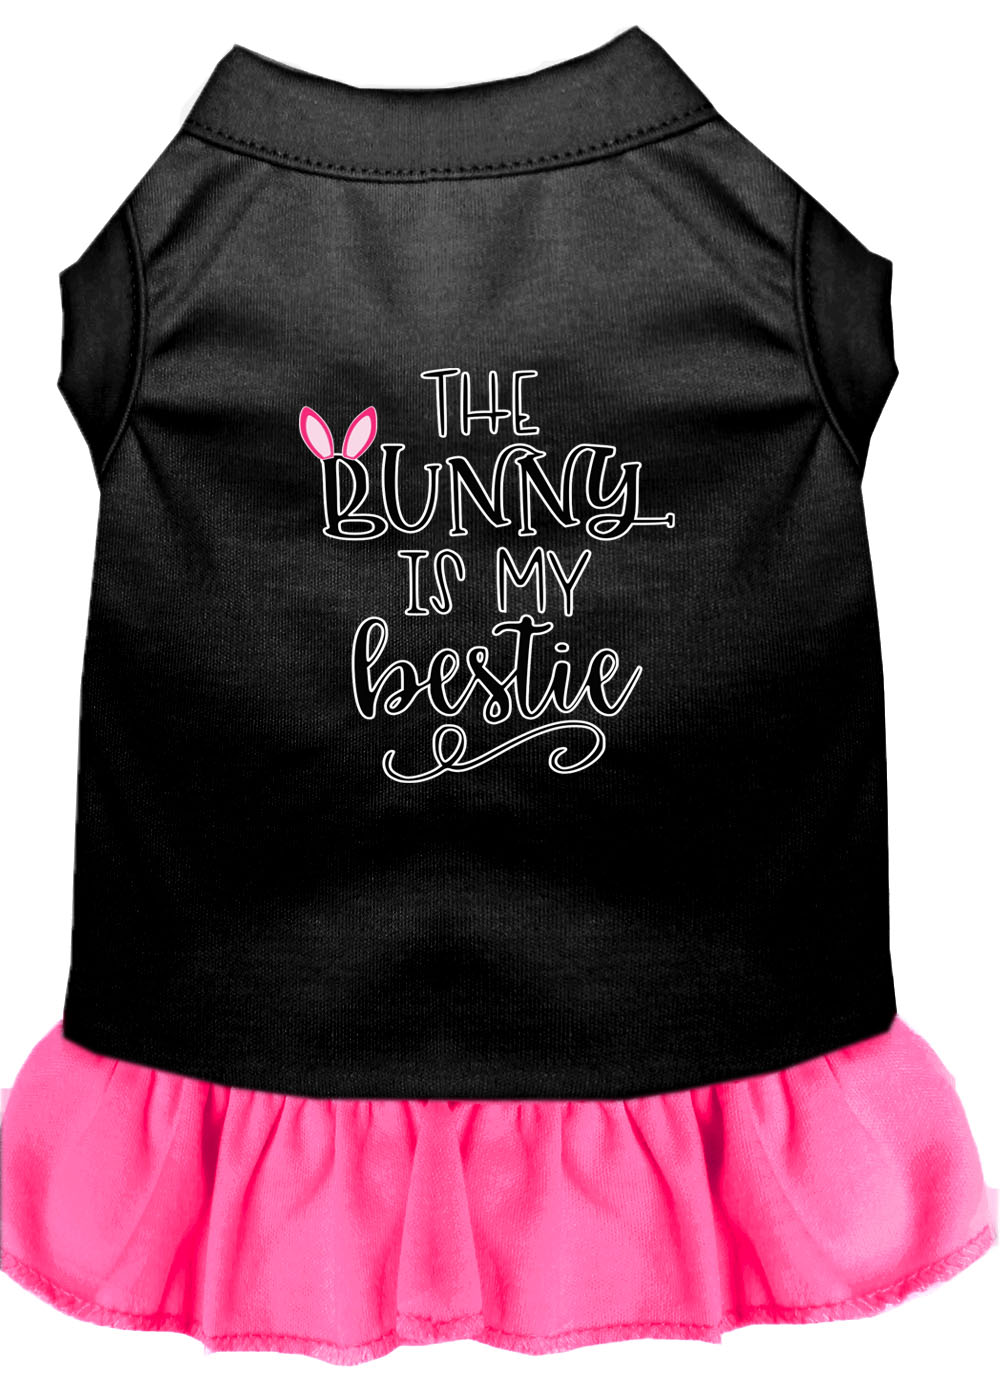 Bunny is my Bestie Screen Print Dog Dress Black with Bright Pink Lg